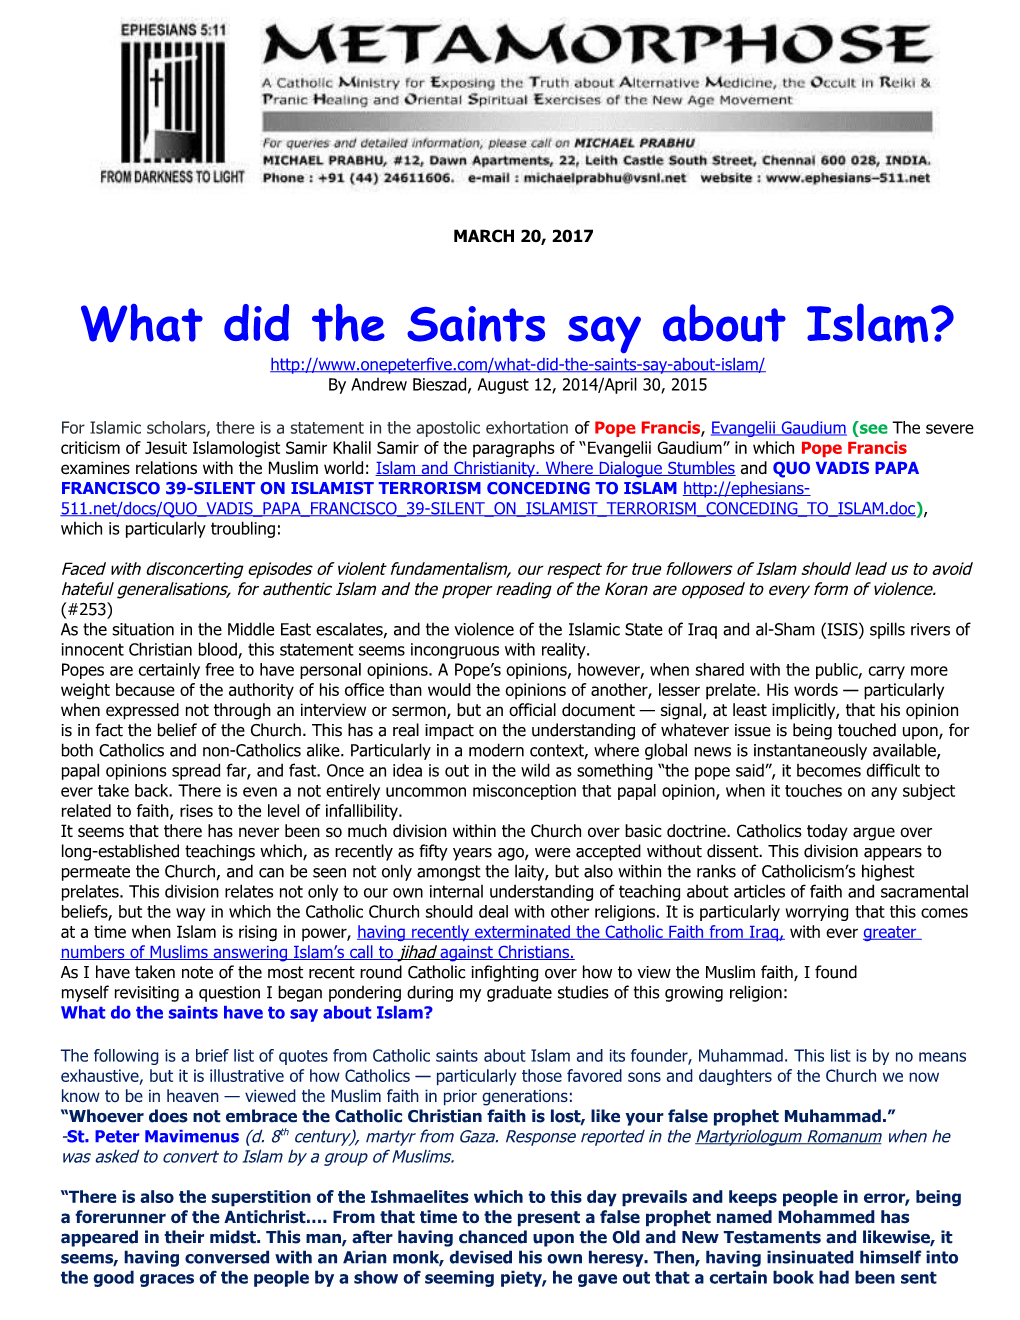 What Did the Saints Say About Islam?